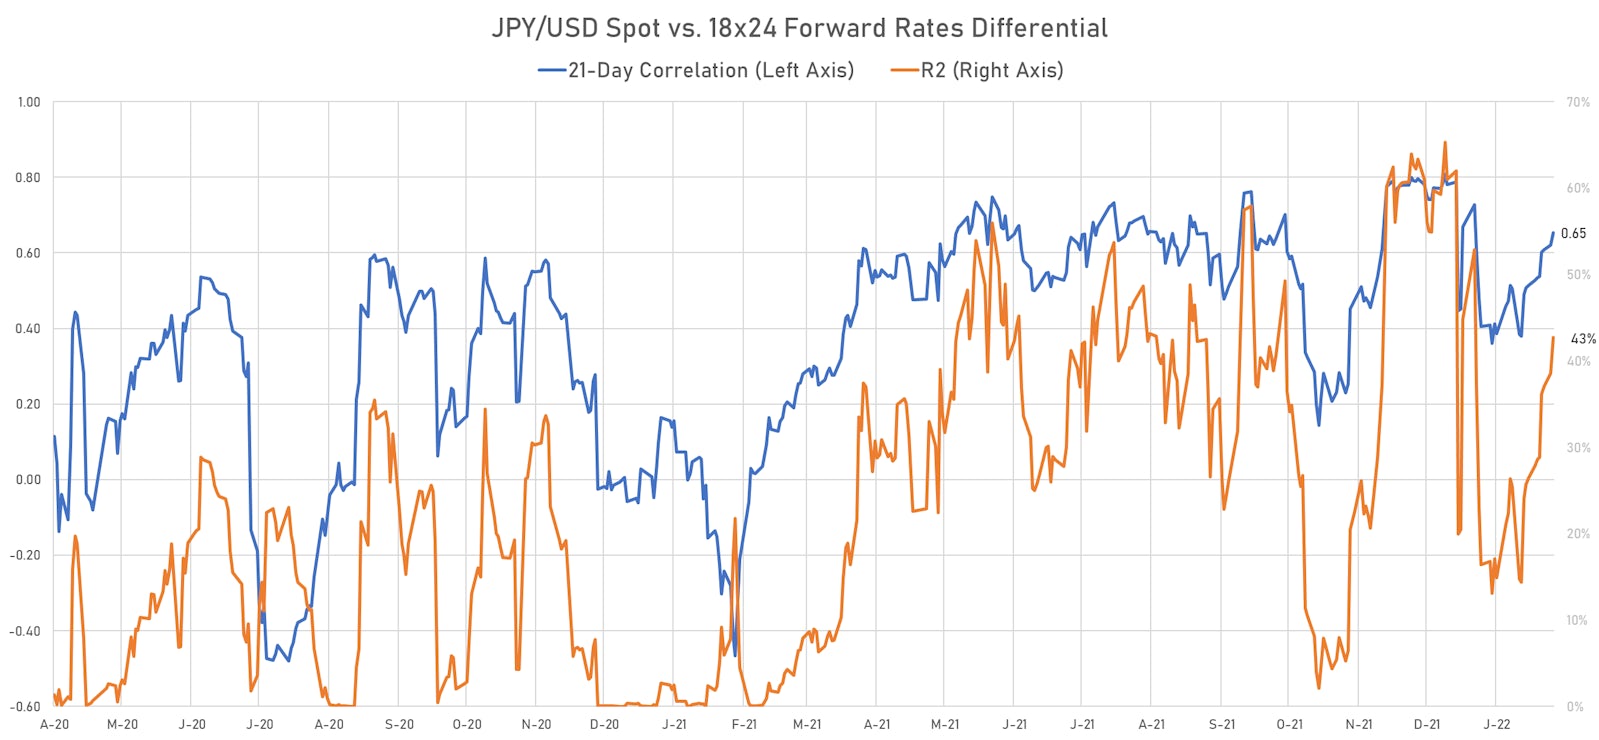 Japanese Yen Spot Rate vs. US-JPY 18x24 Forward Rates Differential | Sources: ϕpost, Refinitiv data